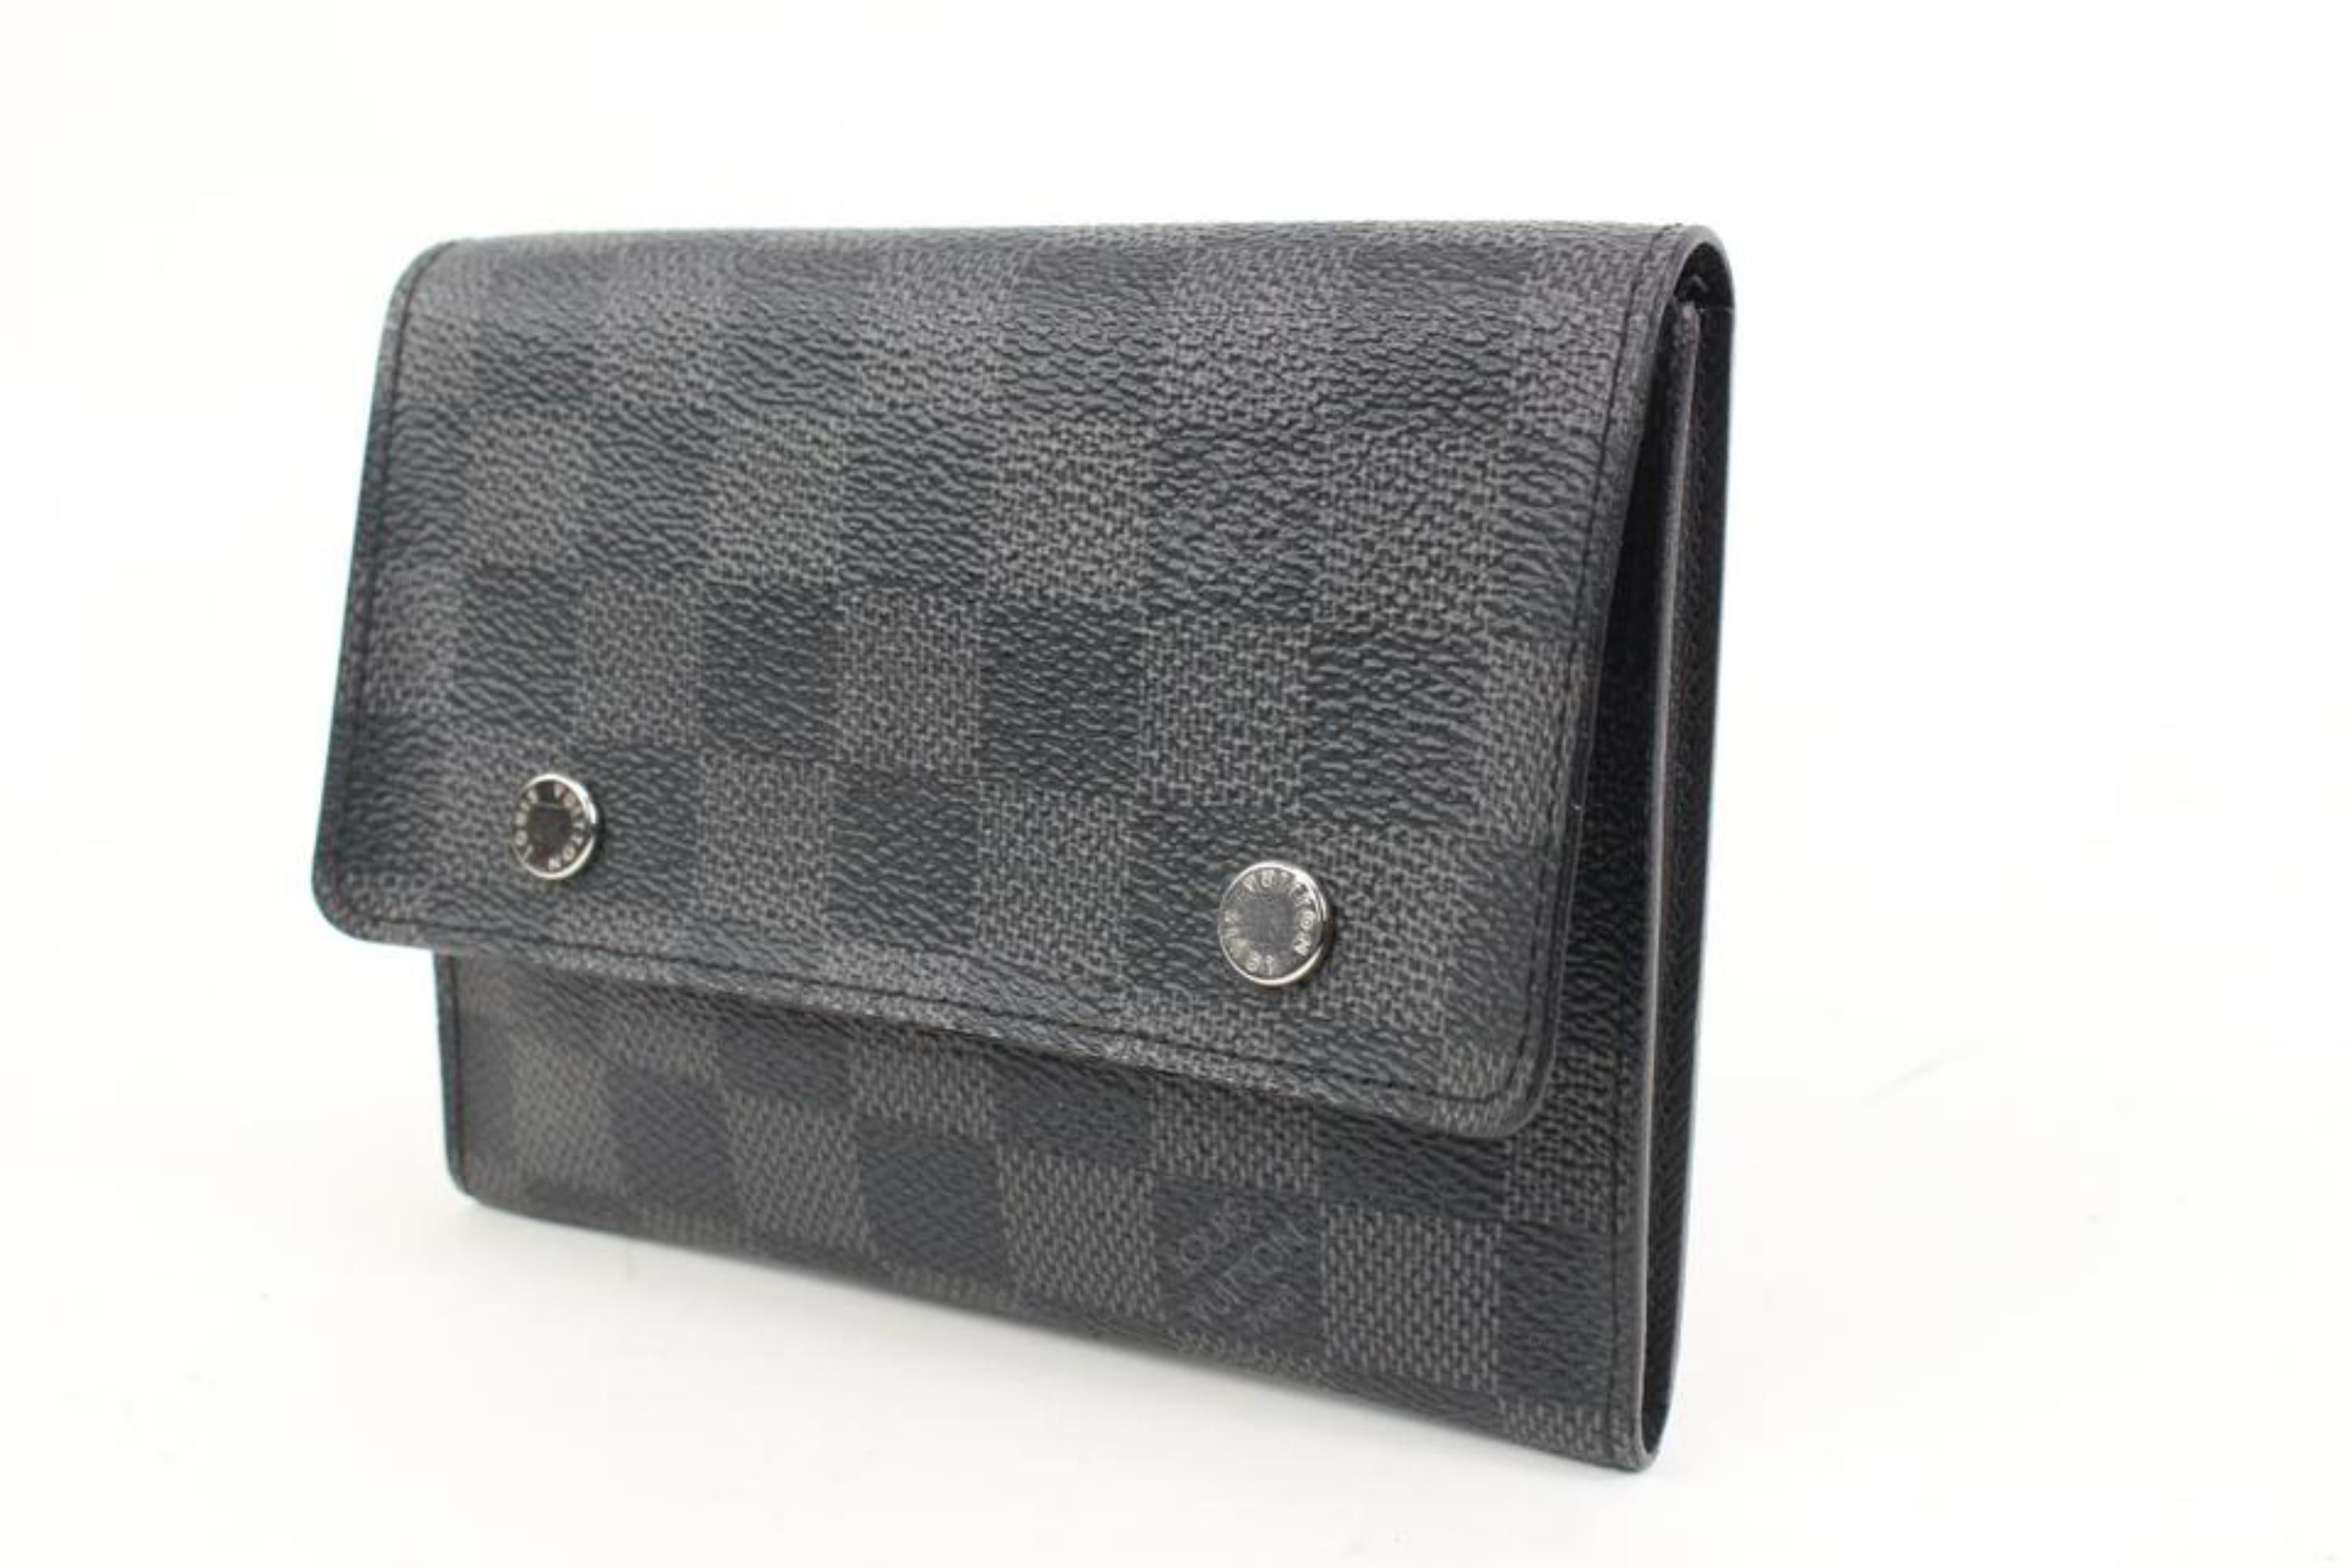 Louis Vuitton Black Damier Graphite Compact Snap Wallet 2lk318s
Date Code/Serial Number: MI4059
Made In: France
Measurements: Length:  5.5